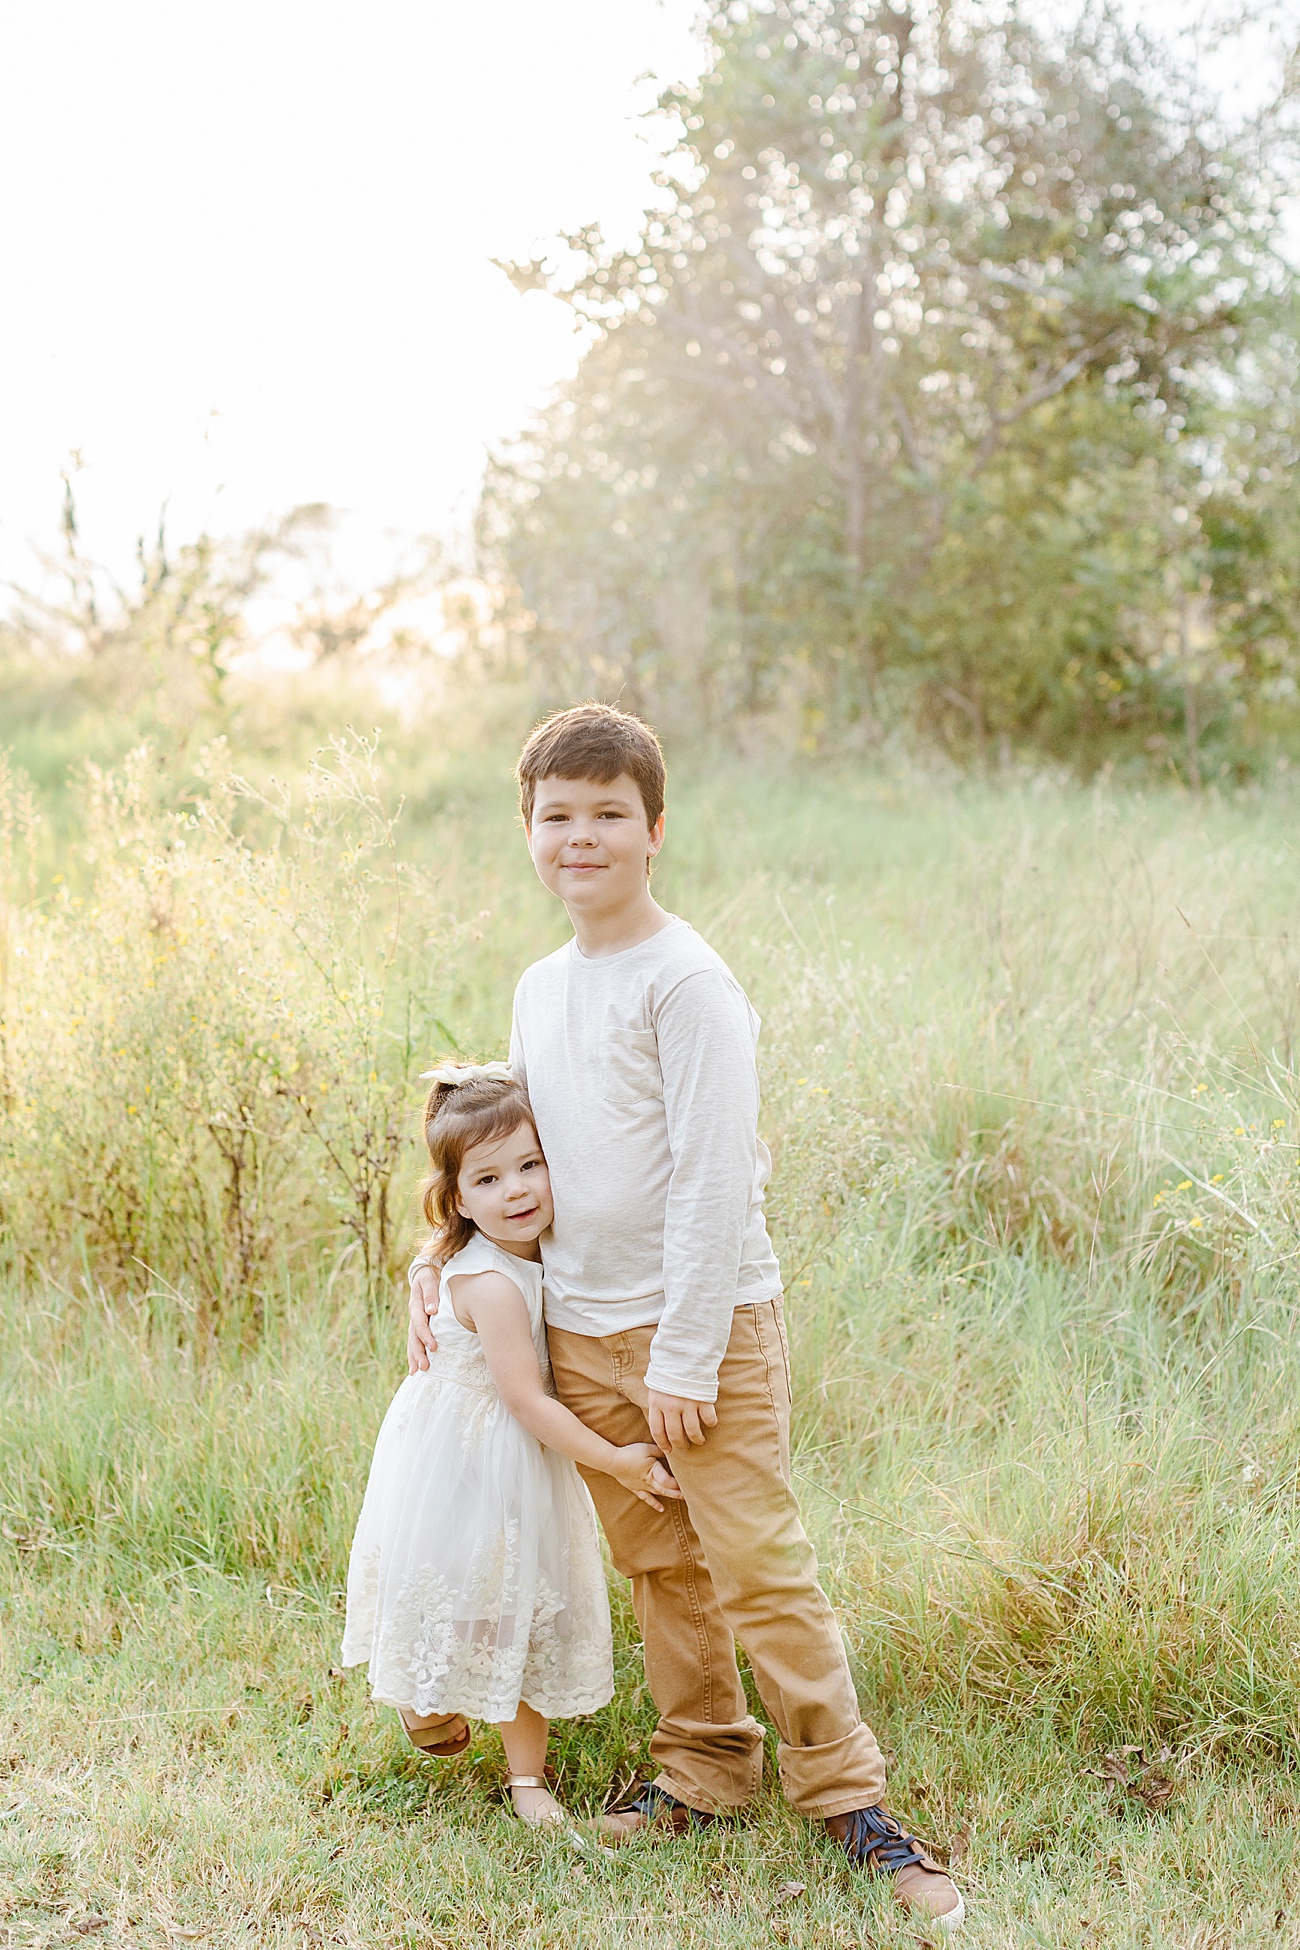 Sweet sibling portrait of brother and sister in sunny Austin, TX field. Photo by Sana Ahmed Photography